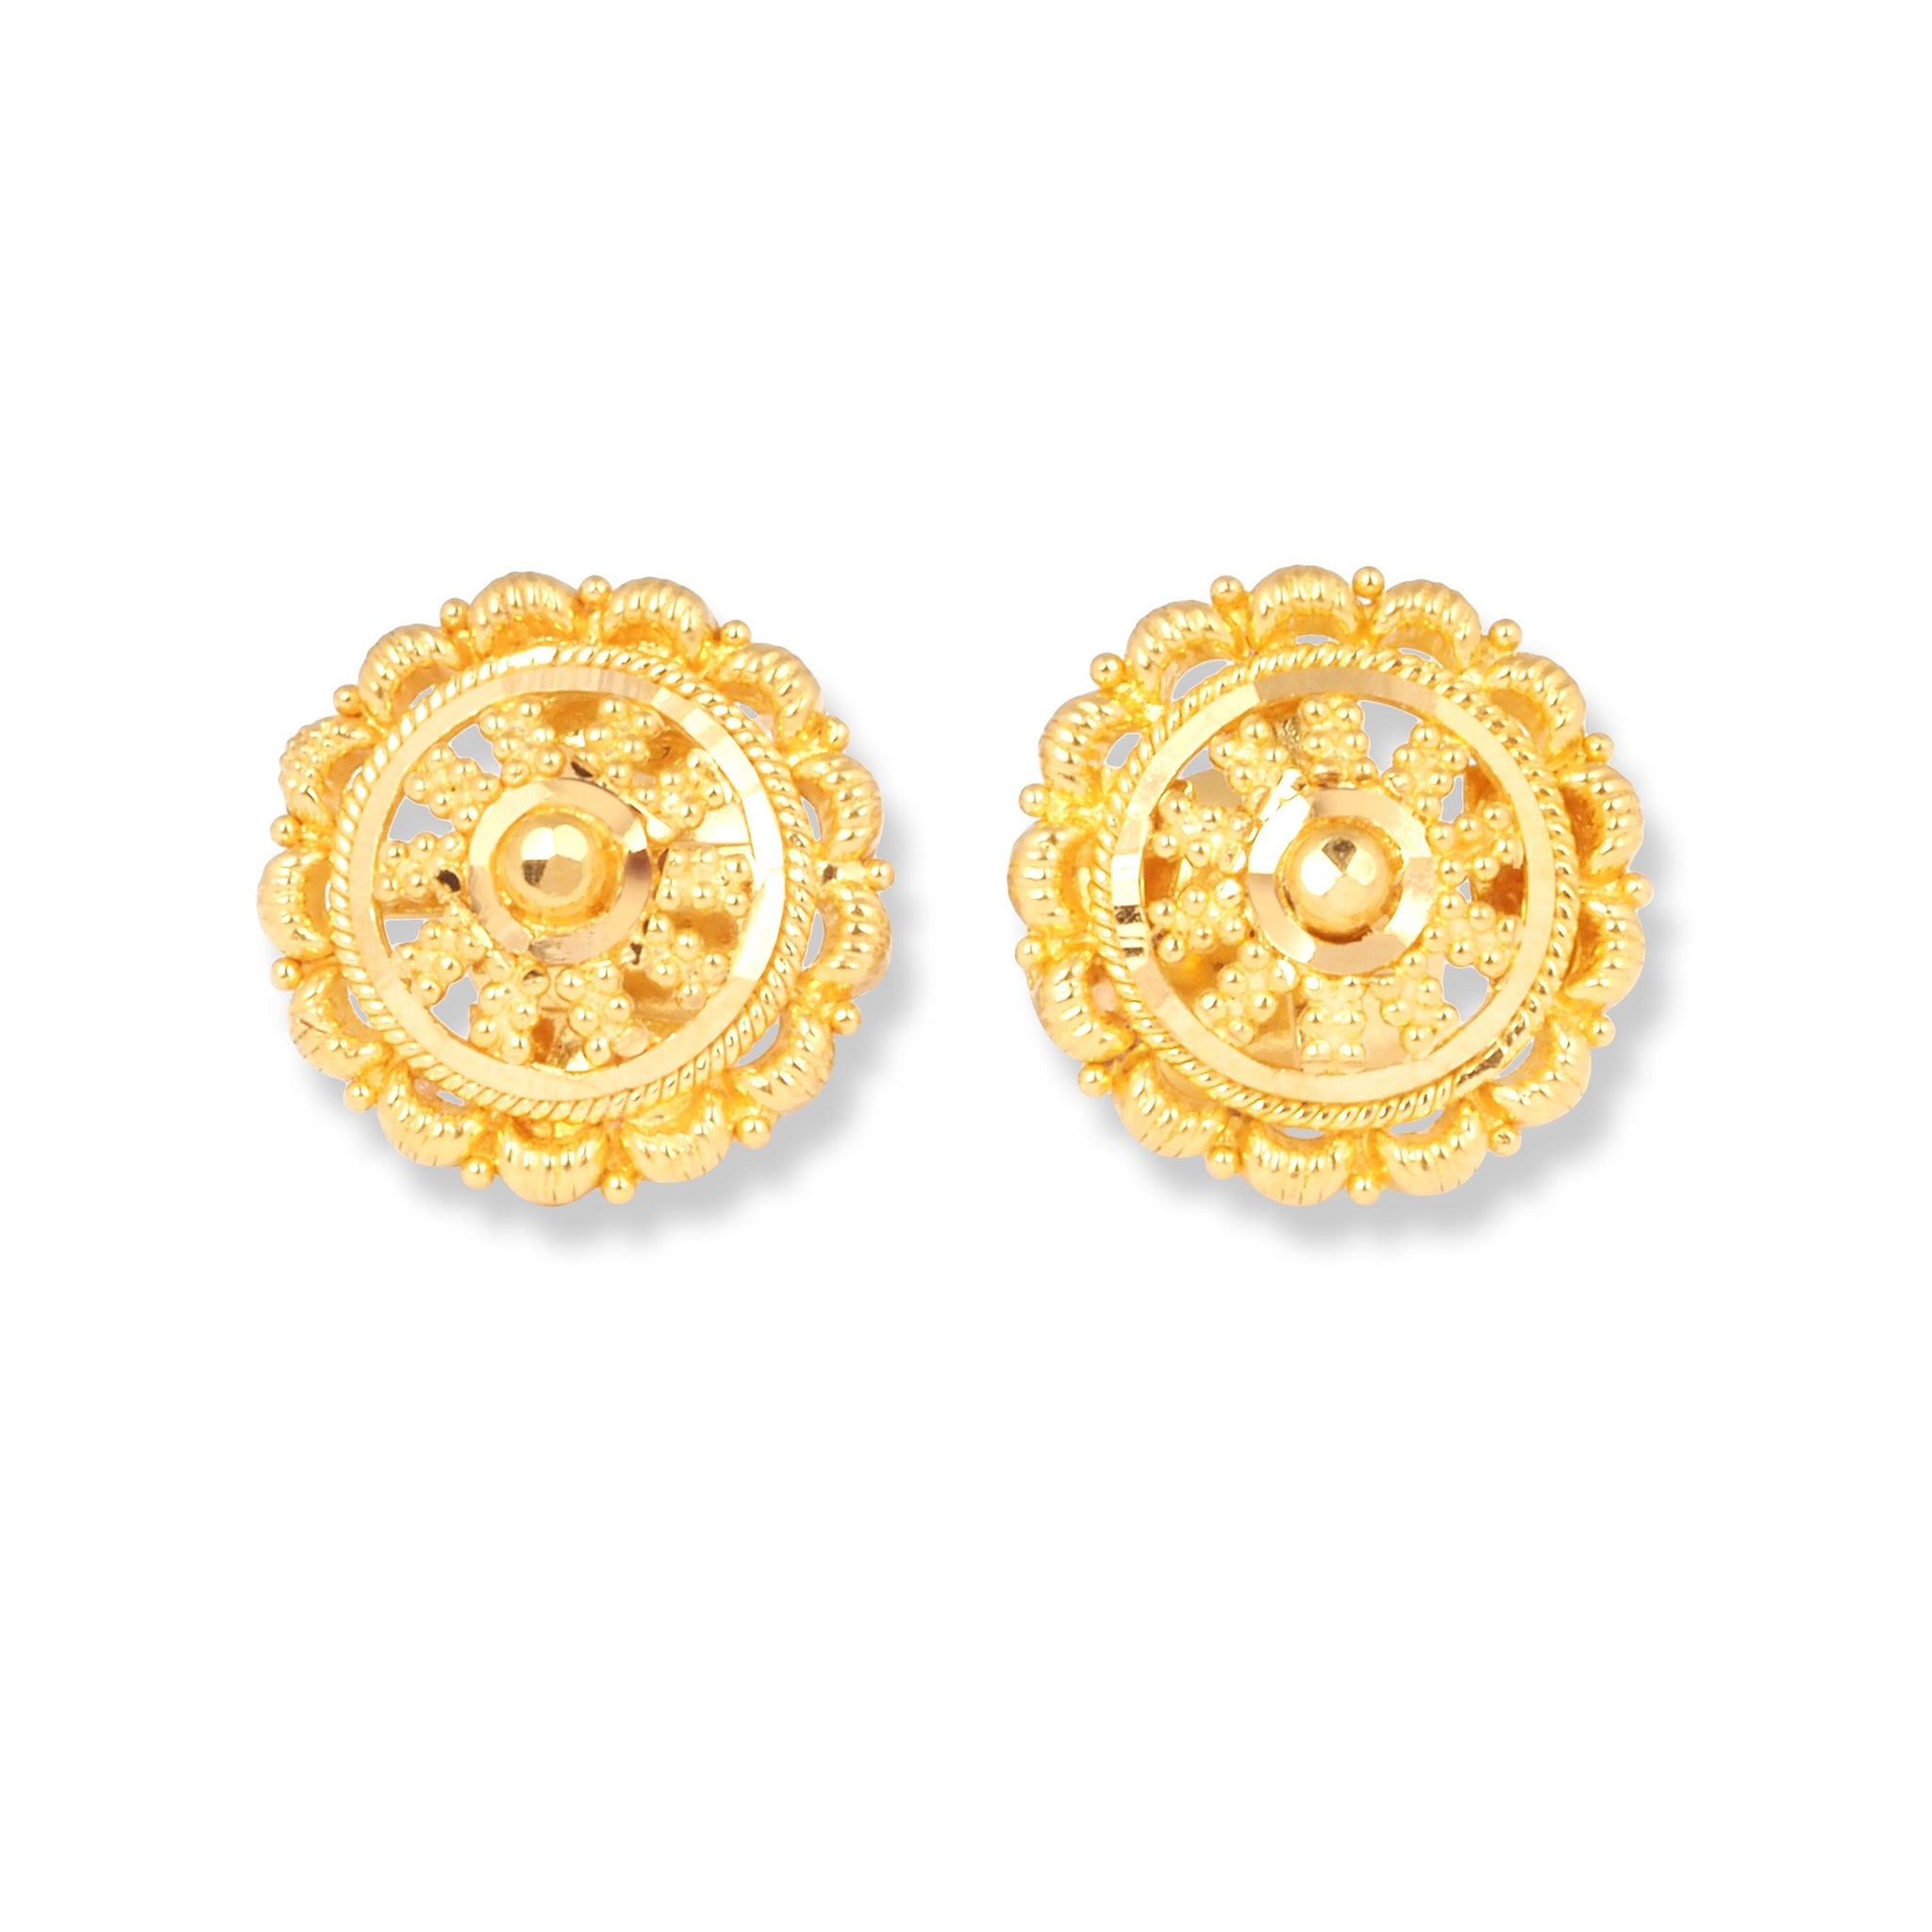 22ct Gold Earrings with Filigree Design (3.5g) E-7886